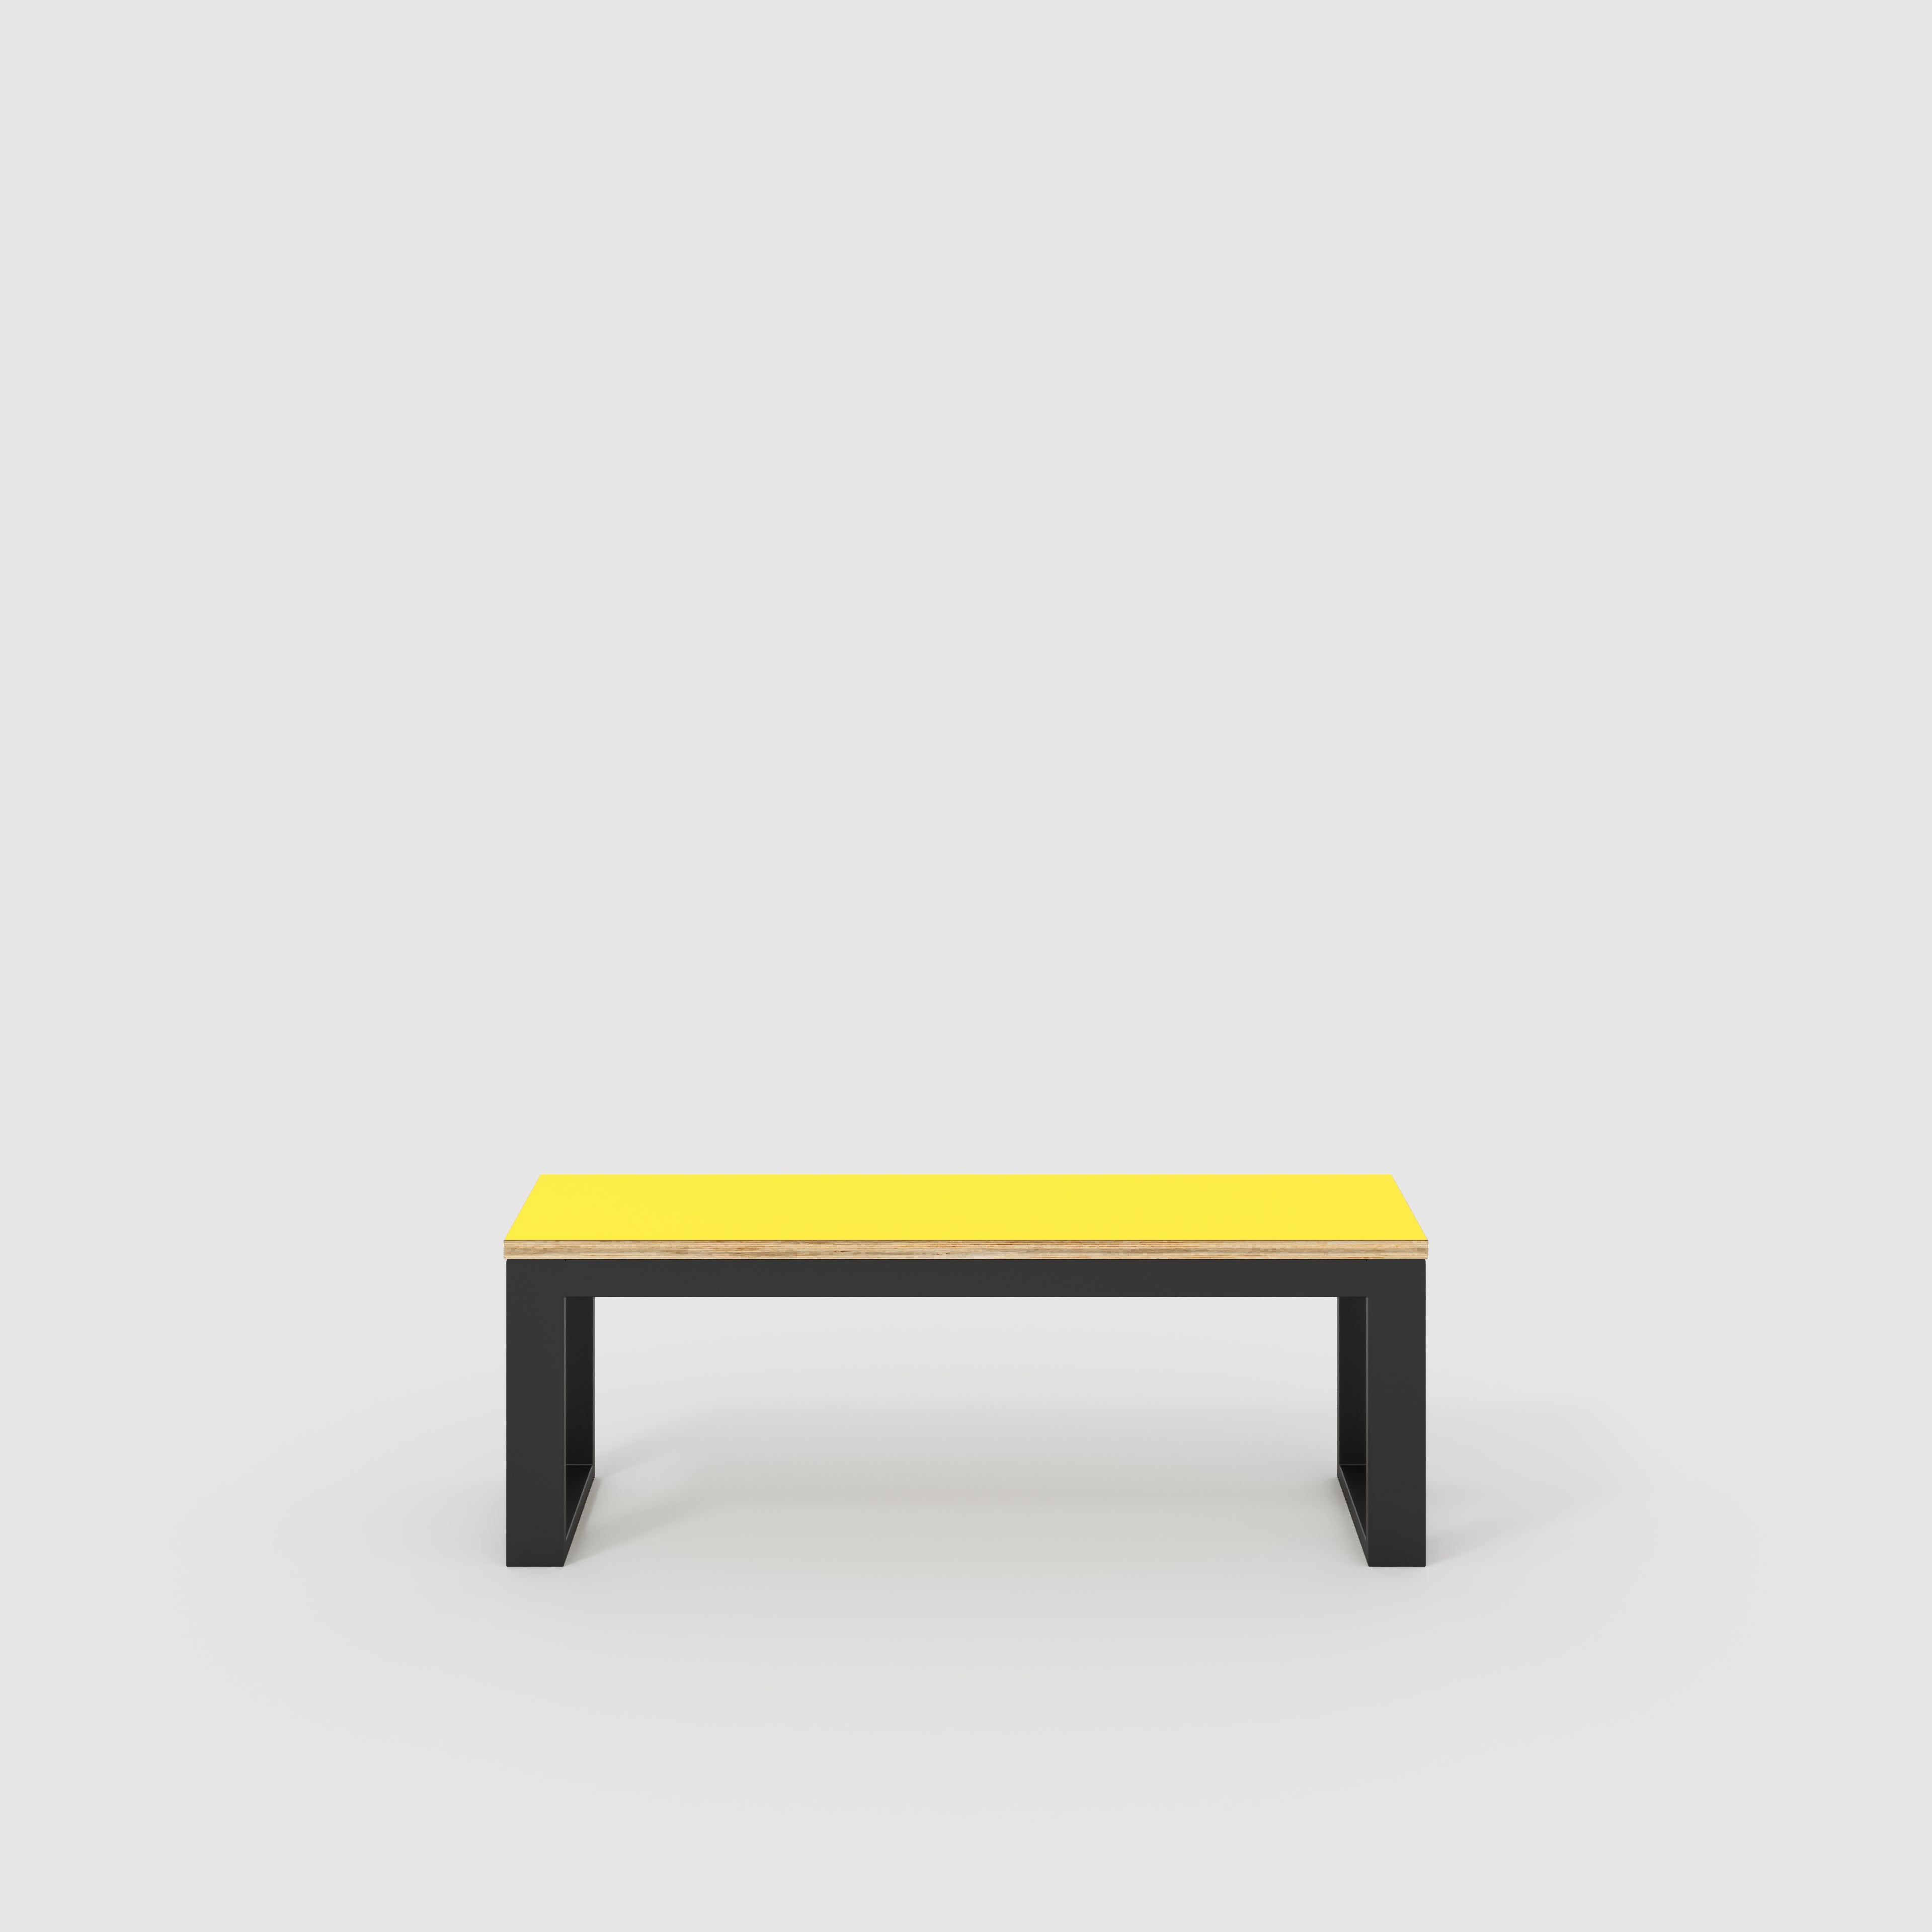 Bench Seat with Black Industrial Frame - Formica Chrome Yellow - 1200(w) x 325(d)